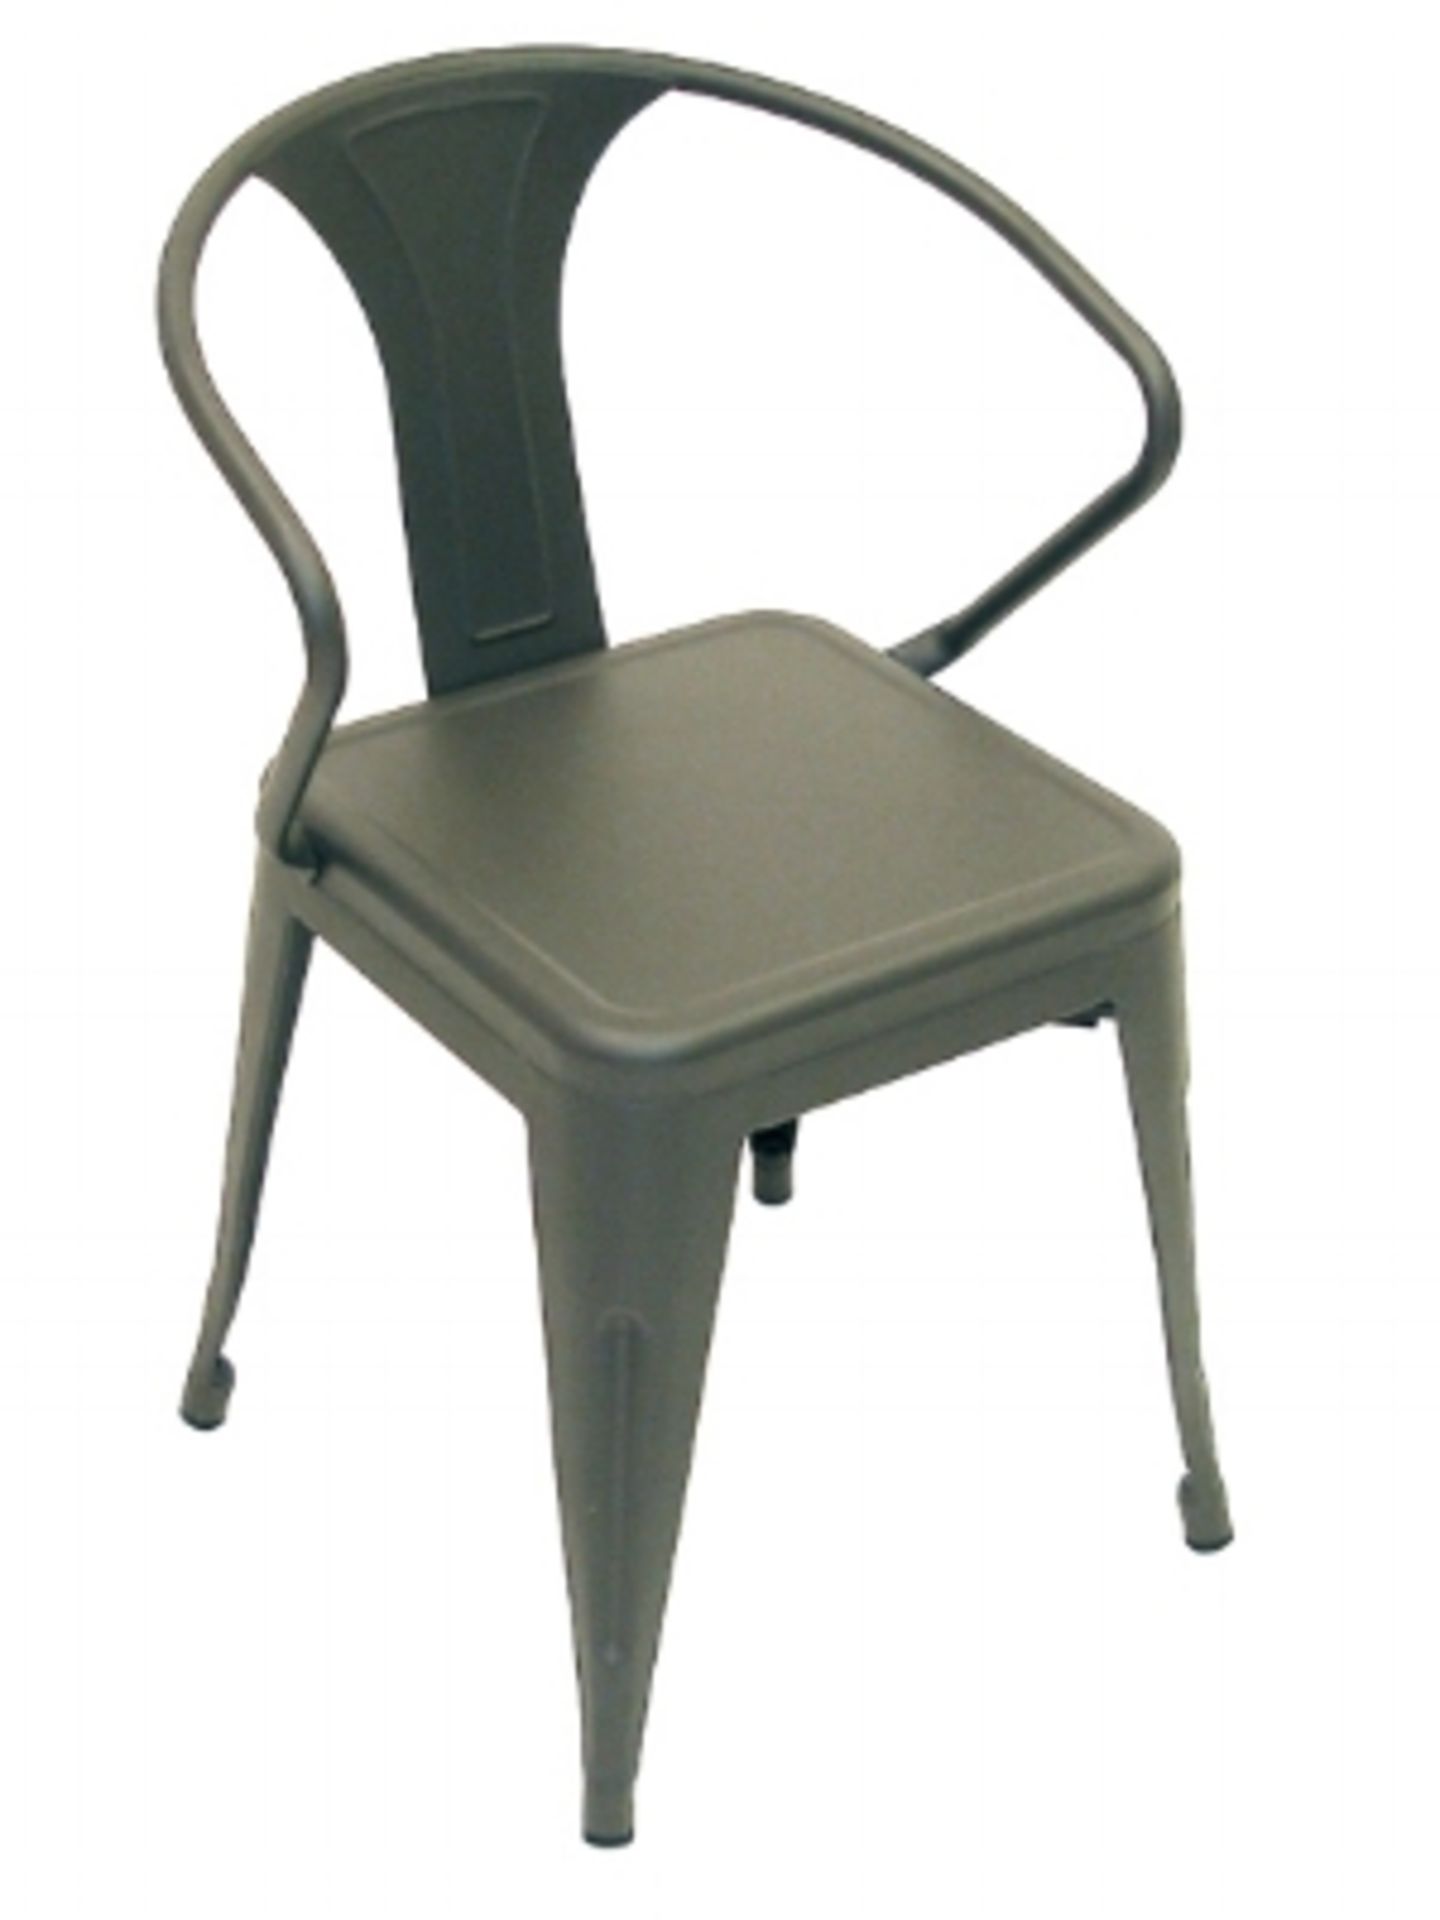 Manhattan Mid-Town Counter Chair - Grey T-5835. Powder Coated epoxy finish on e-coated steel, or